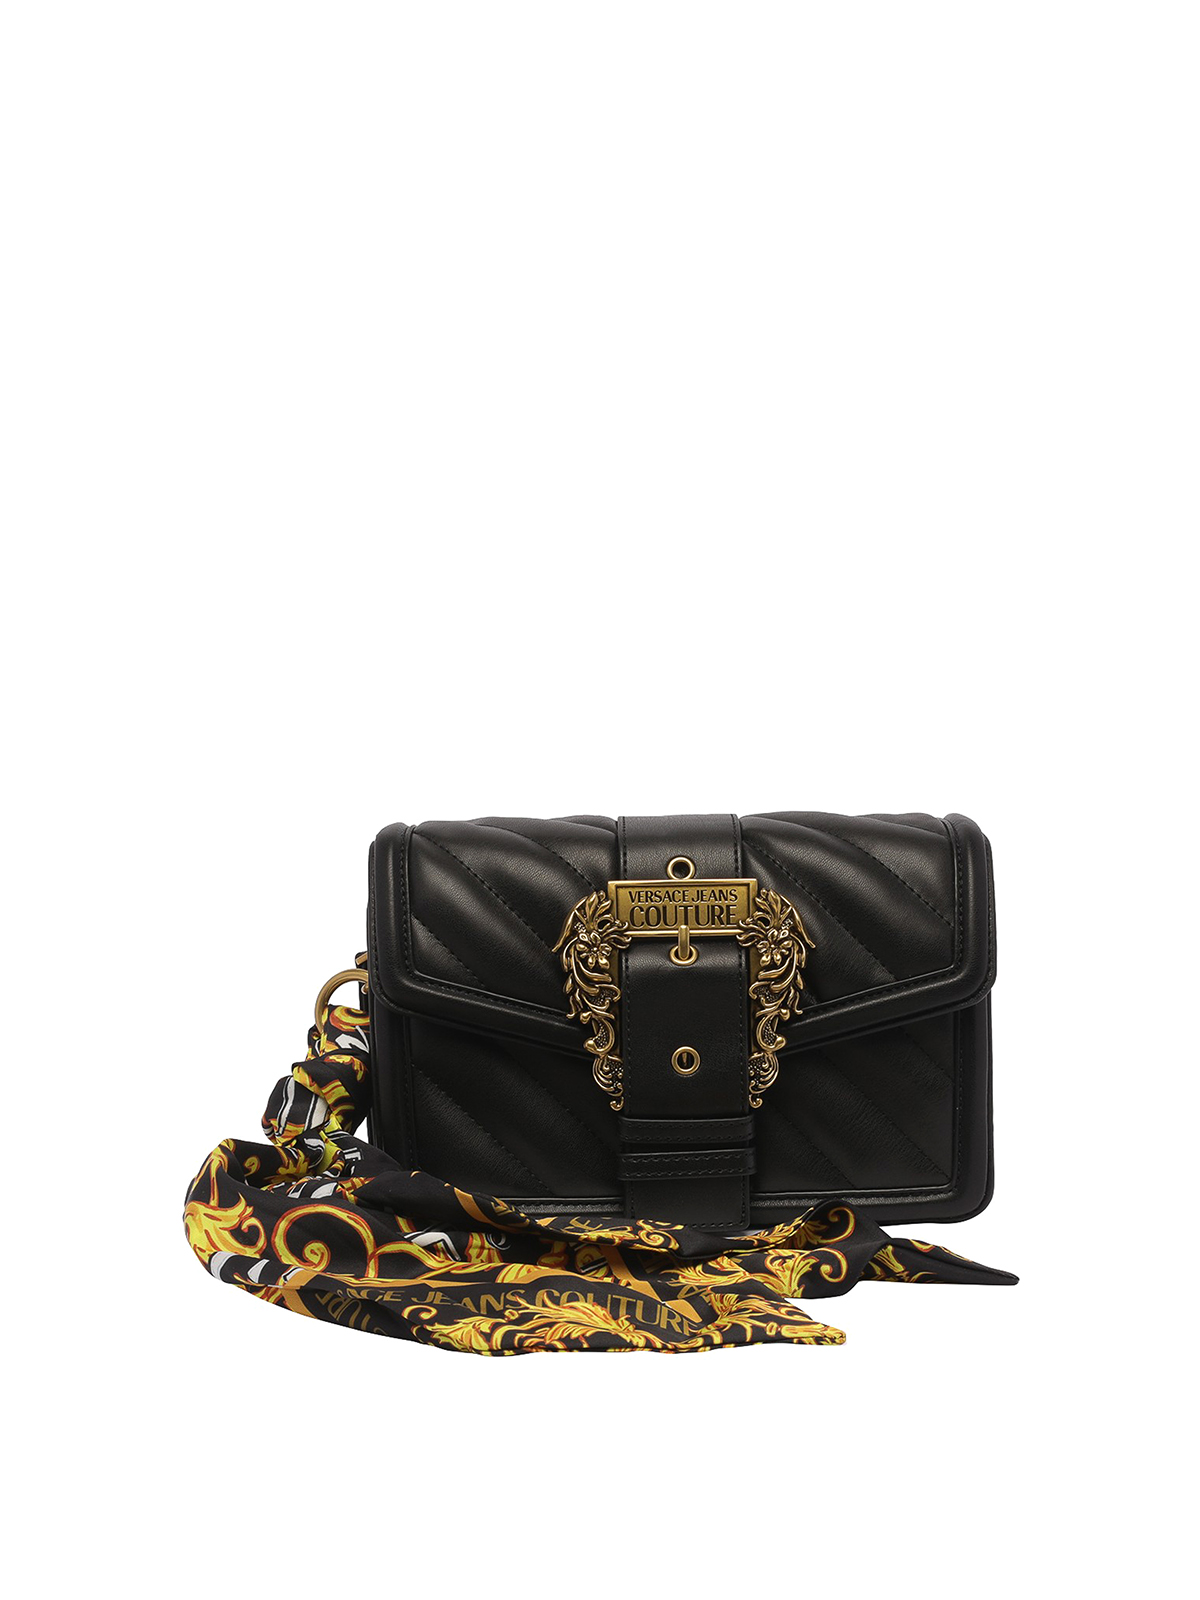 Crossbody bags Versace Jeans Couture Crossbody Bag Black/ Gold